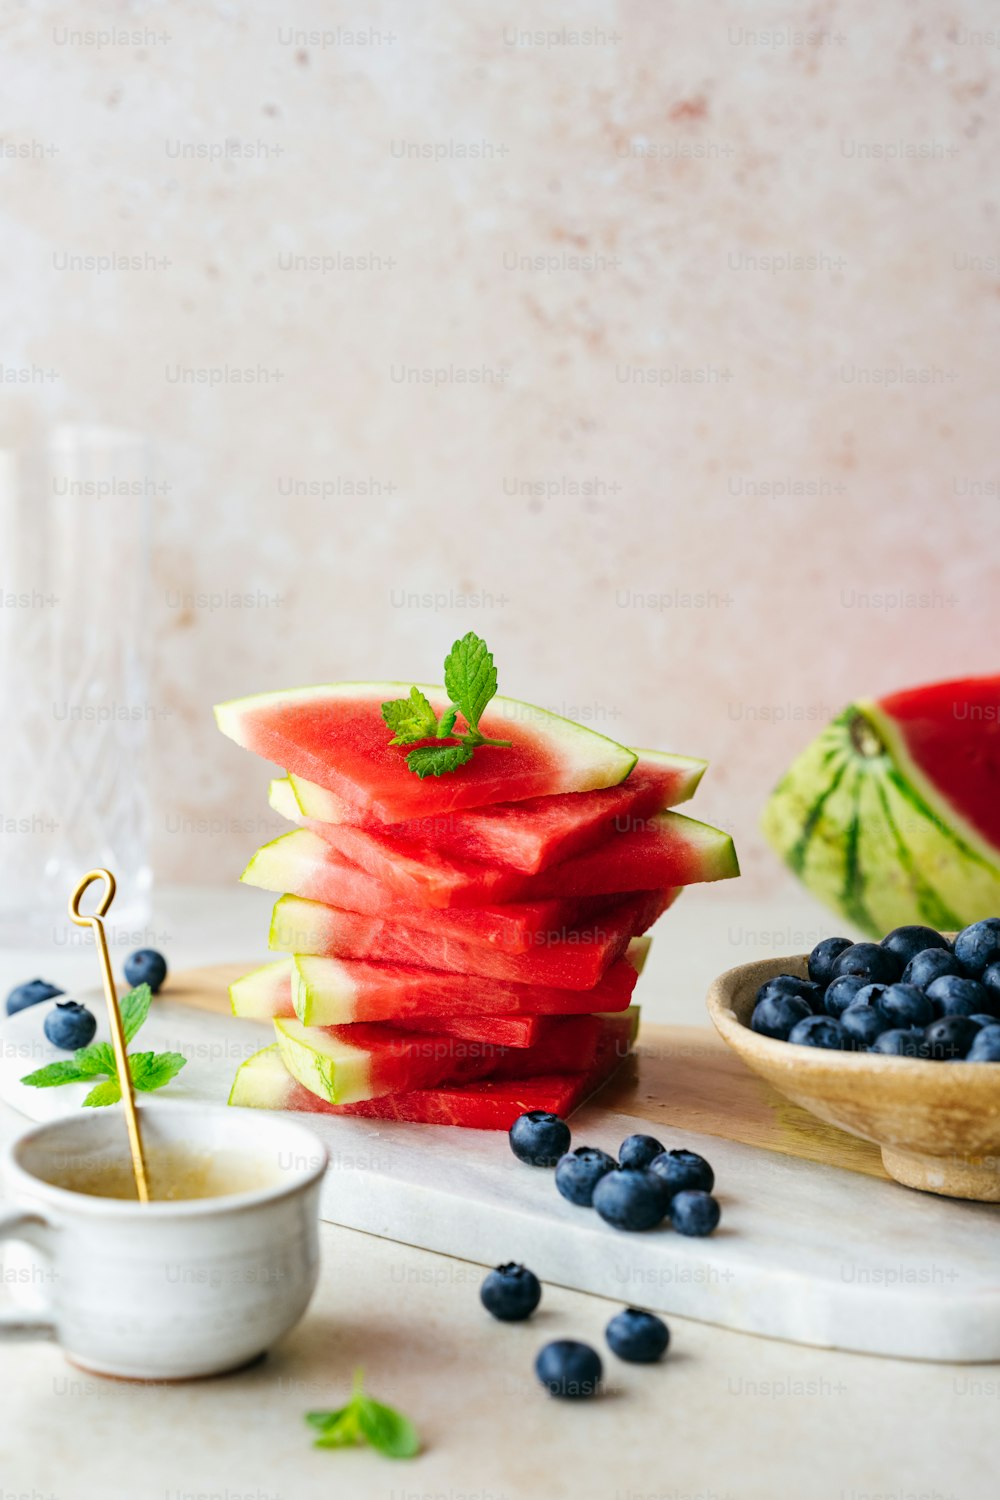 watermelon slices, blueberries, and mint are arranged on a table